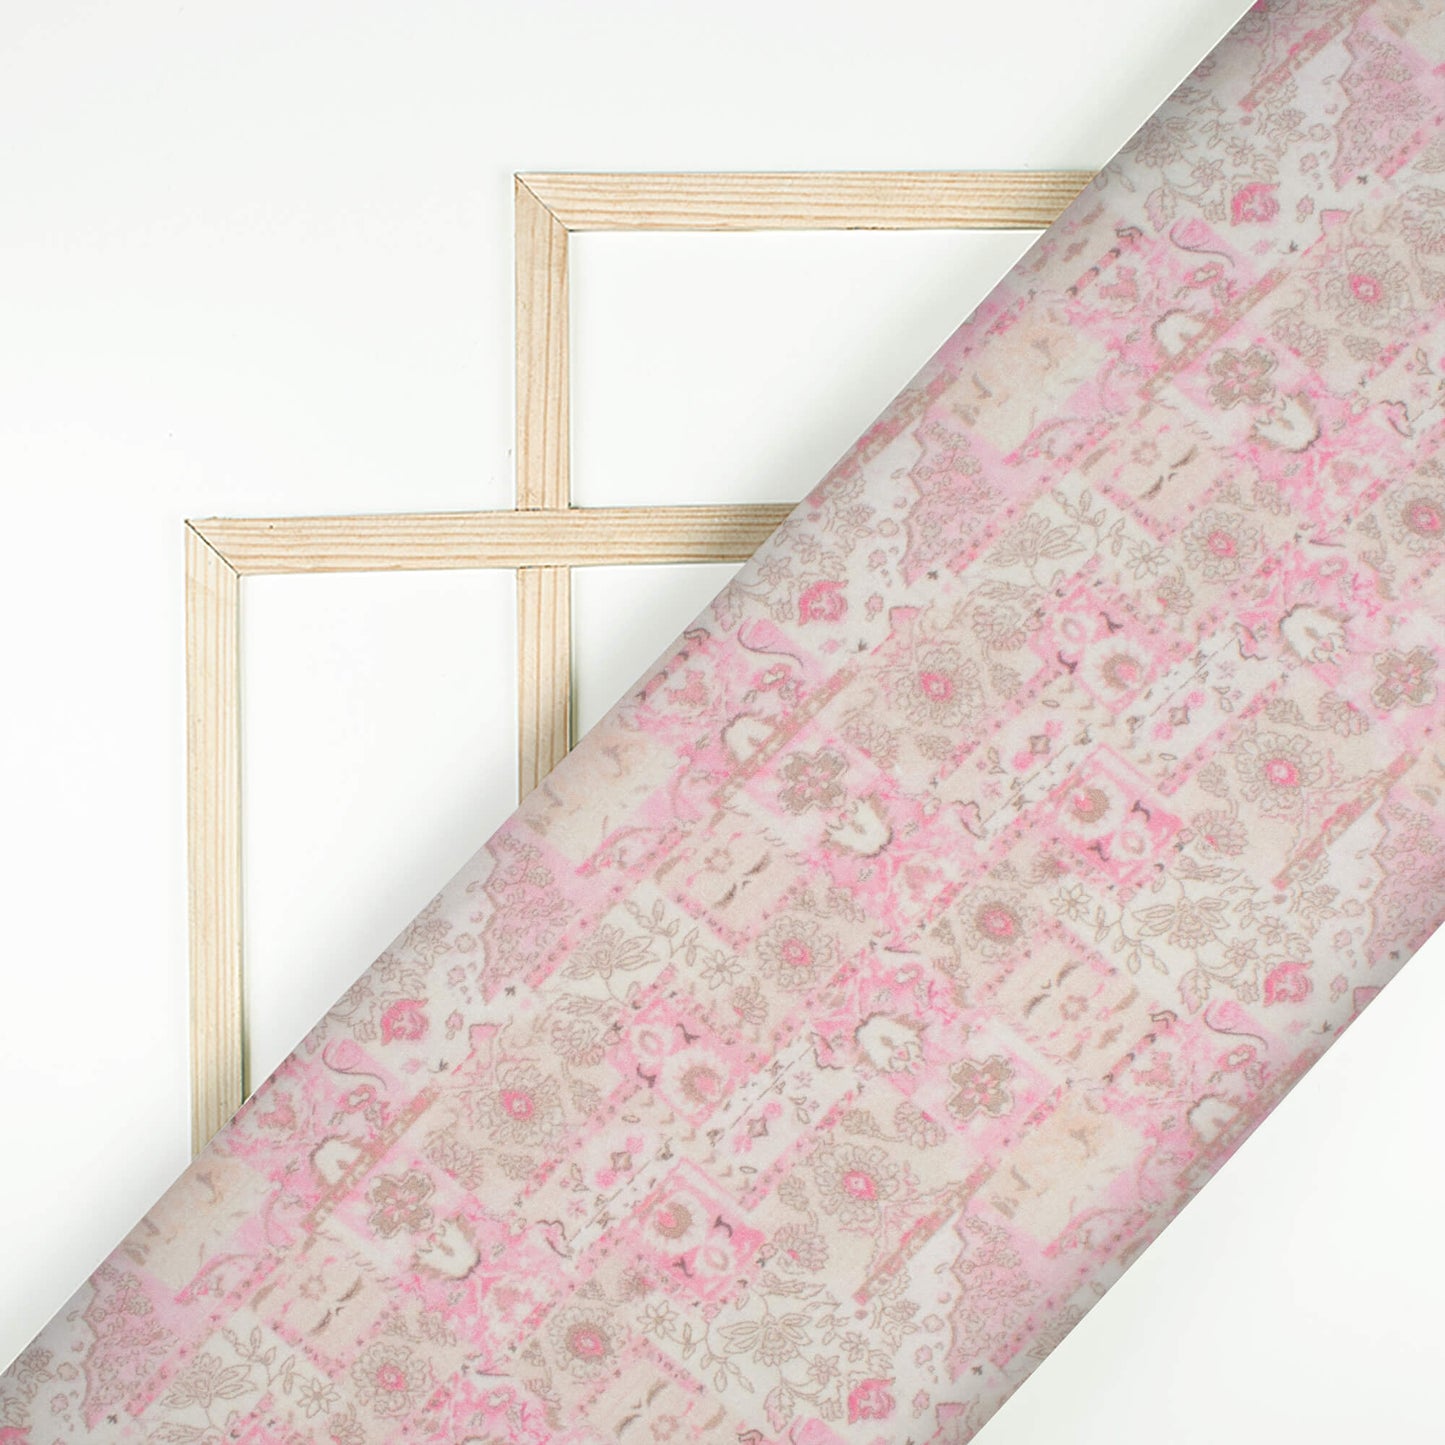 Blush Pink And Beige Floral Digital Print Cotton Cambric Fabric